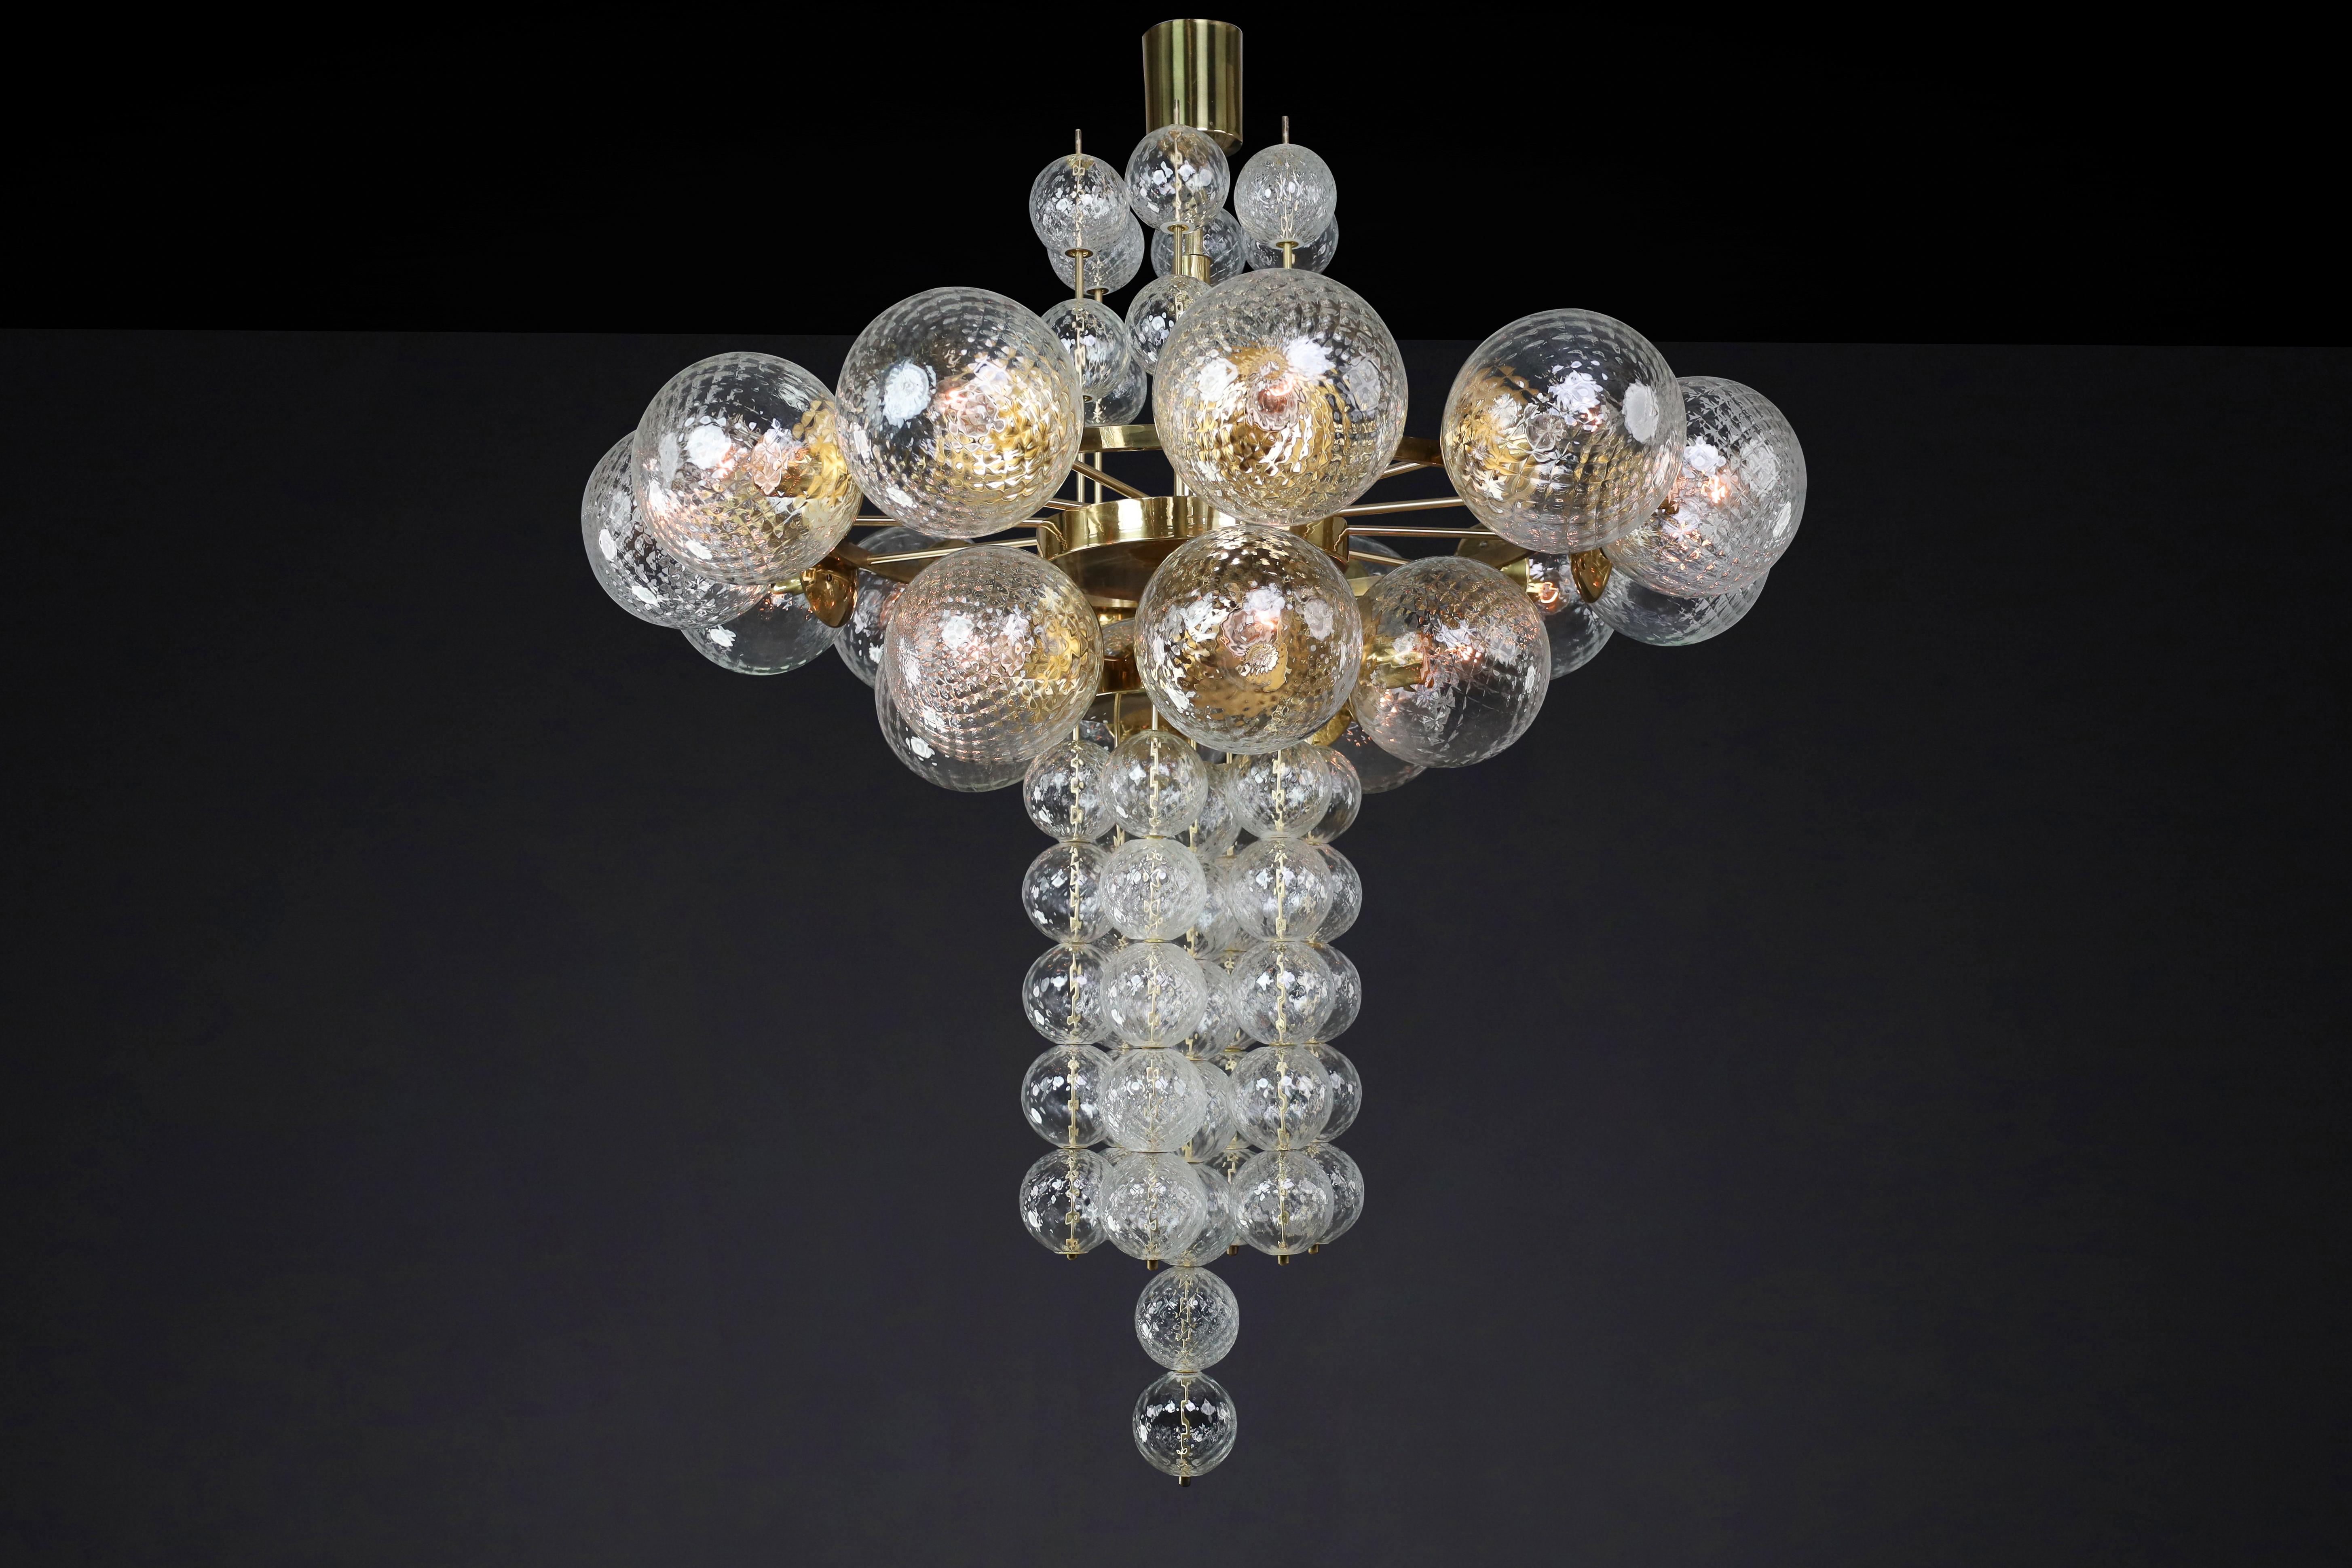 Large Chandelier with brass fixture and hand-blowed glass globes by Preciosa Cz. For Sale 12